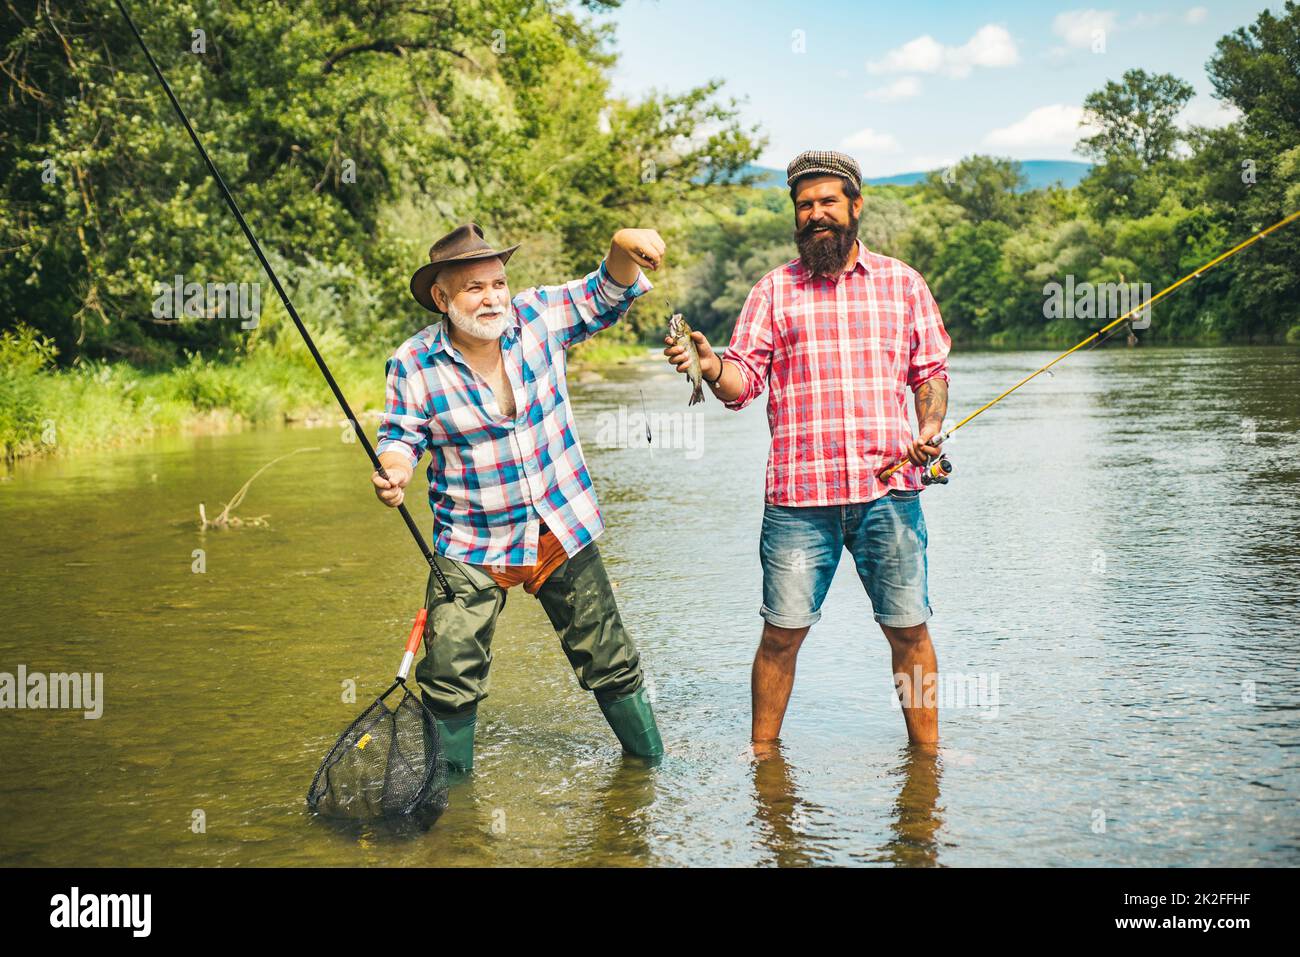 Man friends. Two men friends fishing. Flyfishing angler makes cast, standing in river water. Old and young fisherman. Stock Photo